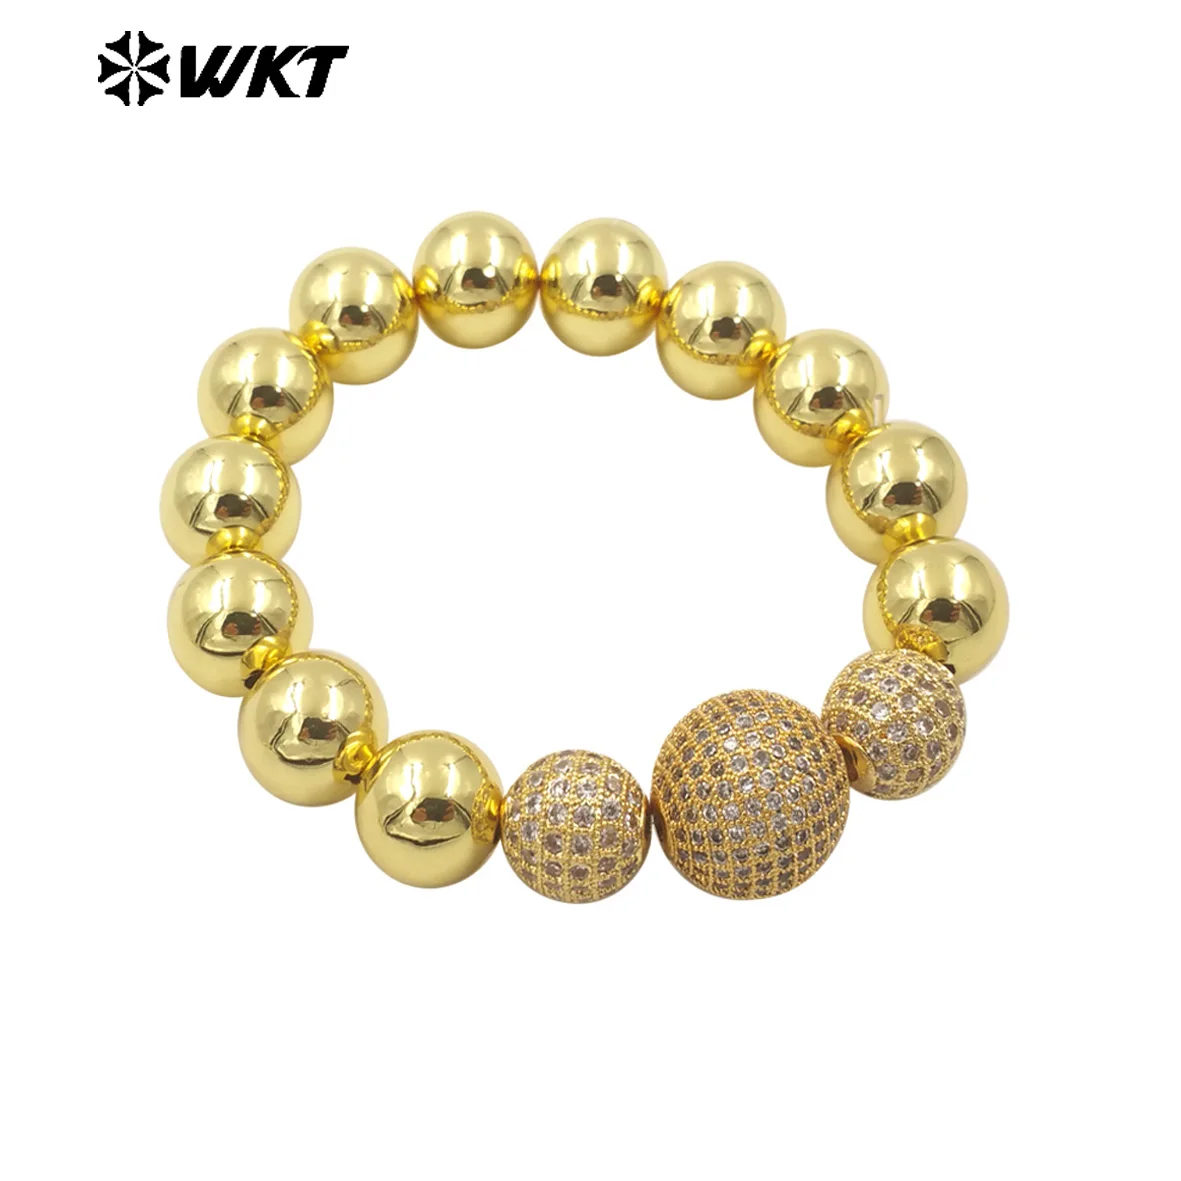 

WT-JF346 Classic And Retro Stretch Bracelet With 18k Gold Beads Three Cubic Zircon Beads For Friends Birthday Gifts Accessories